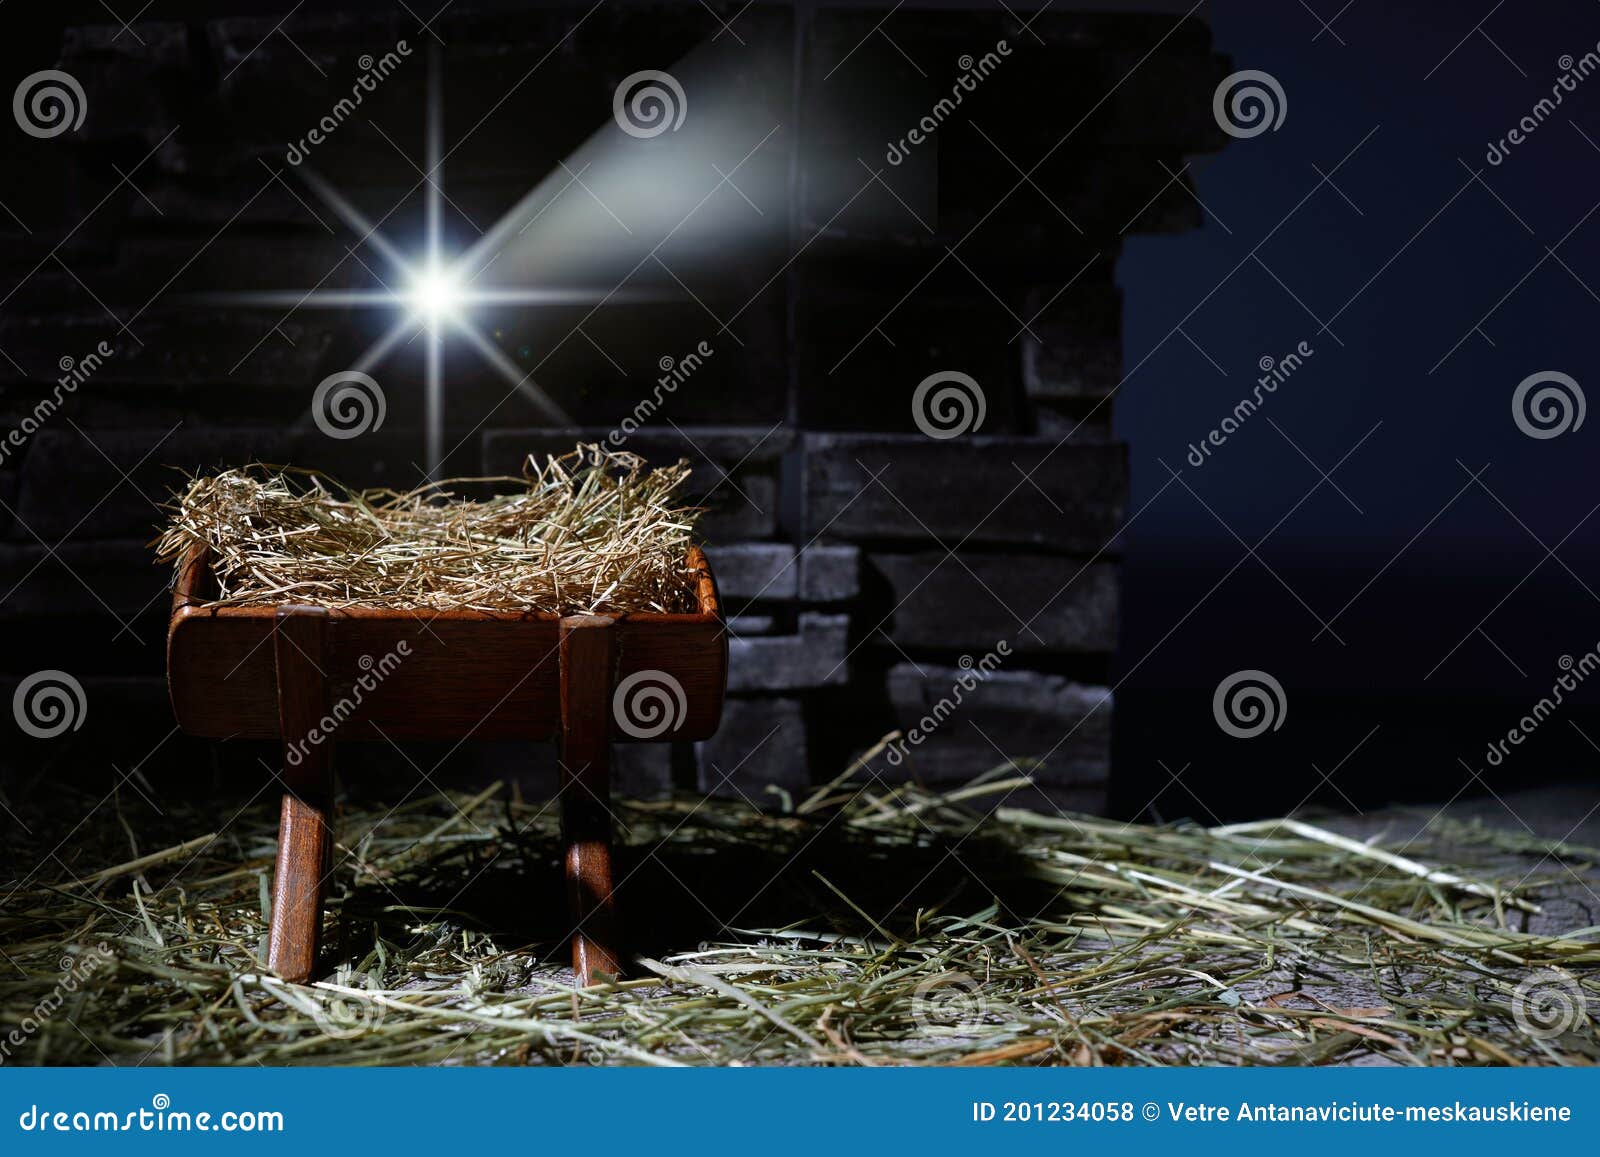 birth of jesus. christmas nativity scene. manager and star.